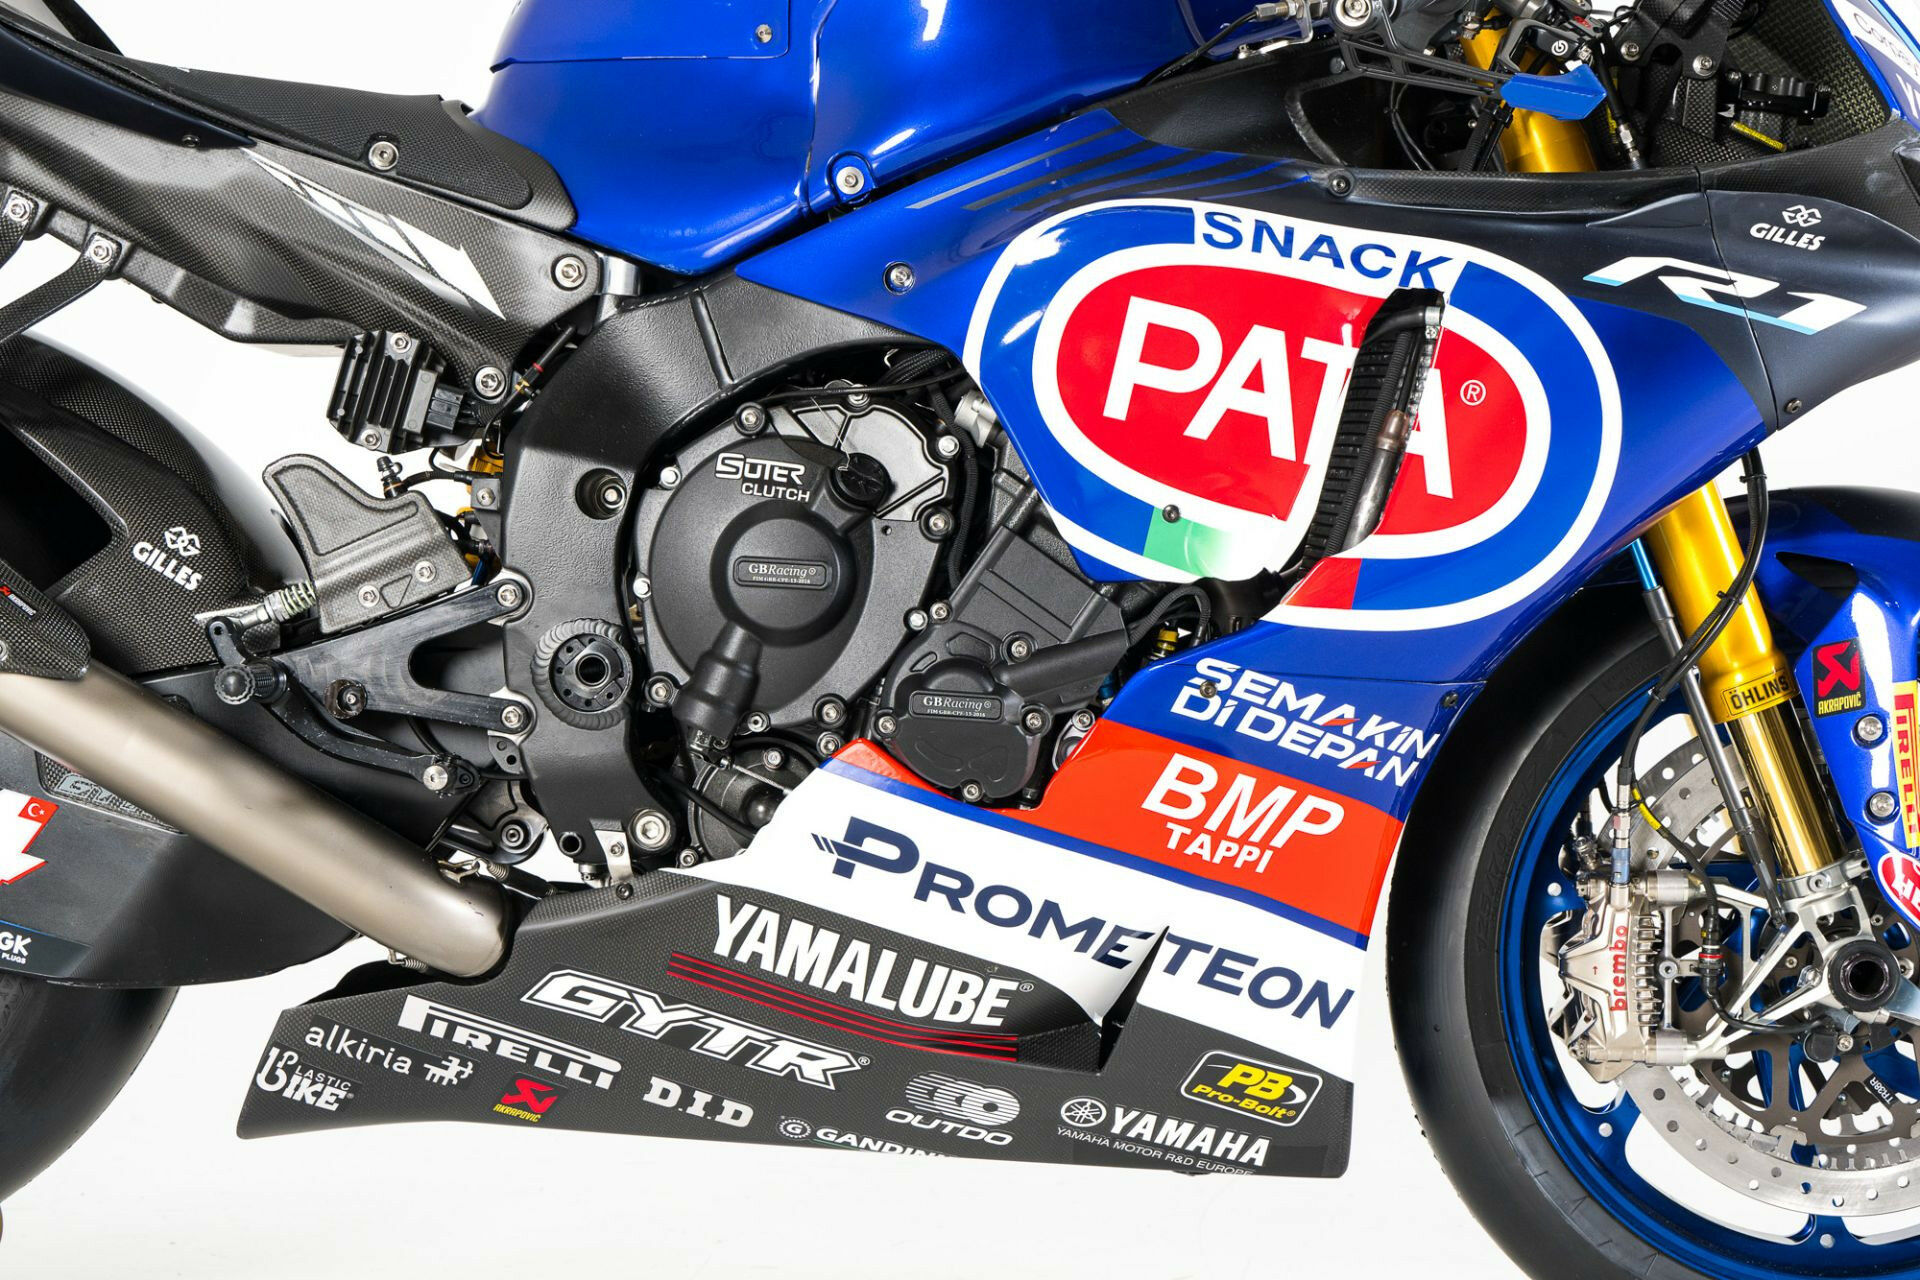 Prometeon Tyre Group is the new co-title sponsor of the factory Yamaha WorldSBK team. Photo courtesy Yamaha.